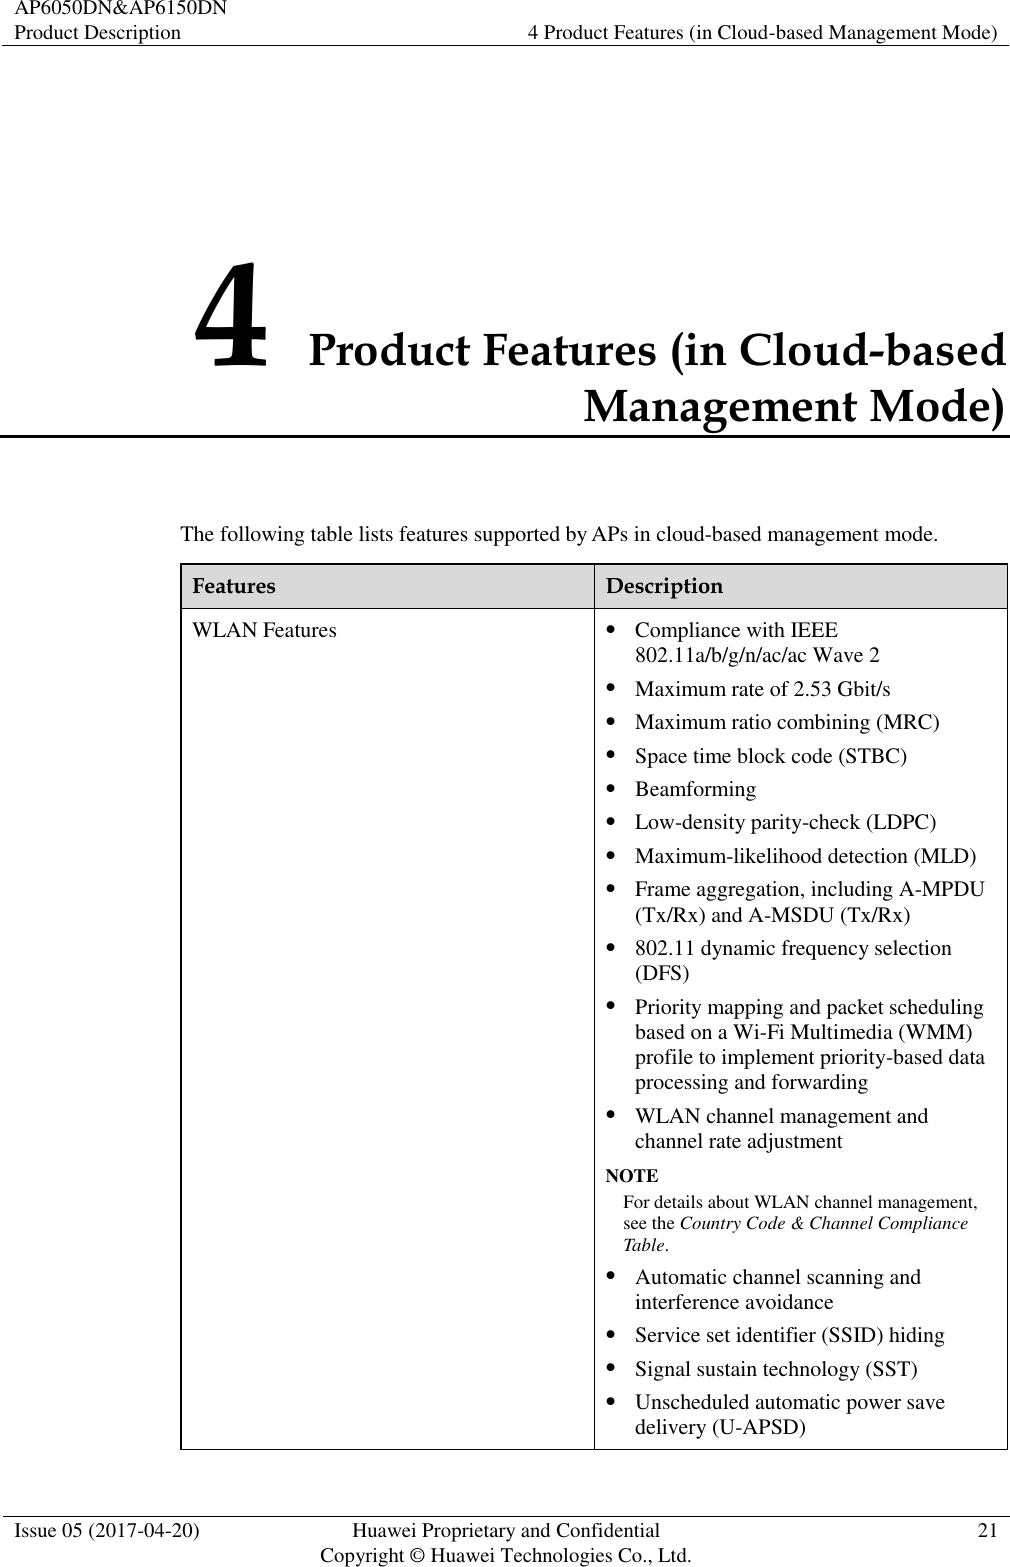 AP6050DN&amp;AP6150DN Product Description 4 Product Features (in Cloud-based Management Mode)  Issue 05 (2017-04-20) Huawei Proprietary and Confidential                                     Copyright © Huawei Technologies Co., Ltd. 21  4 Product Features (in Cloud-based Management Mode) The following table lists features supported by APs in cloud-based management mode. Features Description WLAN Features  Compliance with IEEE 802.11a/b/g/n/ac/ac Wave 2  Maximum rate of 2.53 Gbit/s  Maximum ratio combining (MRC)  Space time block code (STBC)  Beamforming  Low-density parity-check (LDPC)  Maximum-likelihood detection (MLD)  Frame aggregation, including A-MPDU (Tx/Rx) and A-MSDU (Tx/Rx)  802.11 dynamic frequency selection (DFS)  Priority mapping and packet scheduling based on a Wi-Fi Multimedia (WMM) profile to implement priority-based data processing and forwarding  WLAN channel management and channel rate adjustment NOTE For details about WLAN channel management, see the Country Code &amp; Channel Compliance Table.  Automatic channel scanning and interference avoidance  Service set identifier (SSID) hiding  Signal sustain technology (SST)  Unscheduled automatic power save delivery (U-APSD) 